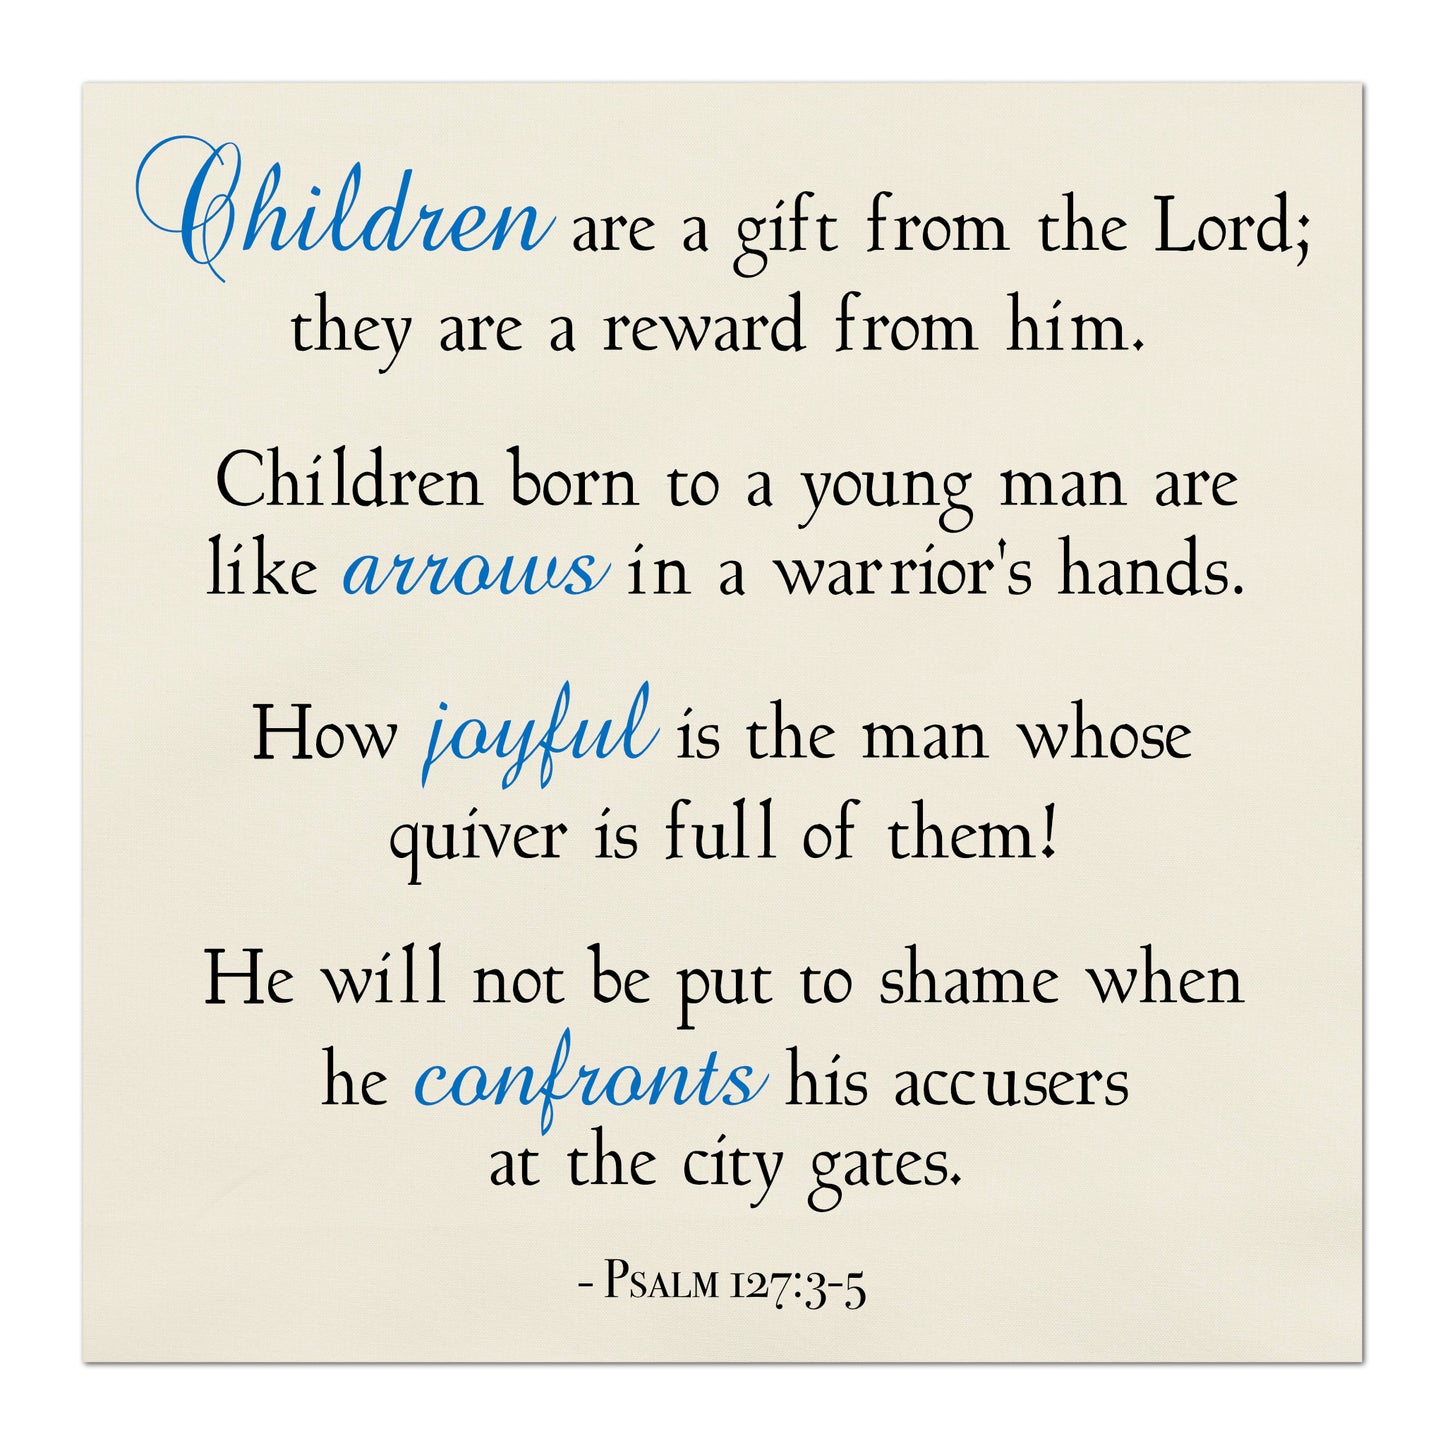 Children are a gift from the Lord; they are a reward from him.  Children born to a young man are like arrows in a warrior's hands.  How joyful is the man whose quiver is full of them!   He will not be put to shame when he confronts his accusers at the city gates - Psalm 127:3-5, Religious Fabric, Scripture, Quilt Block Fabric